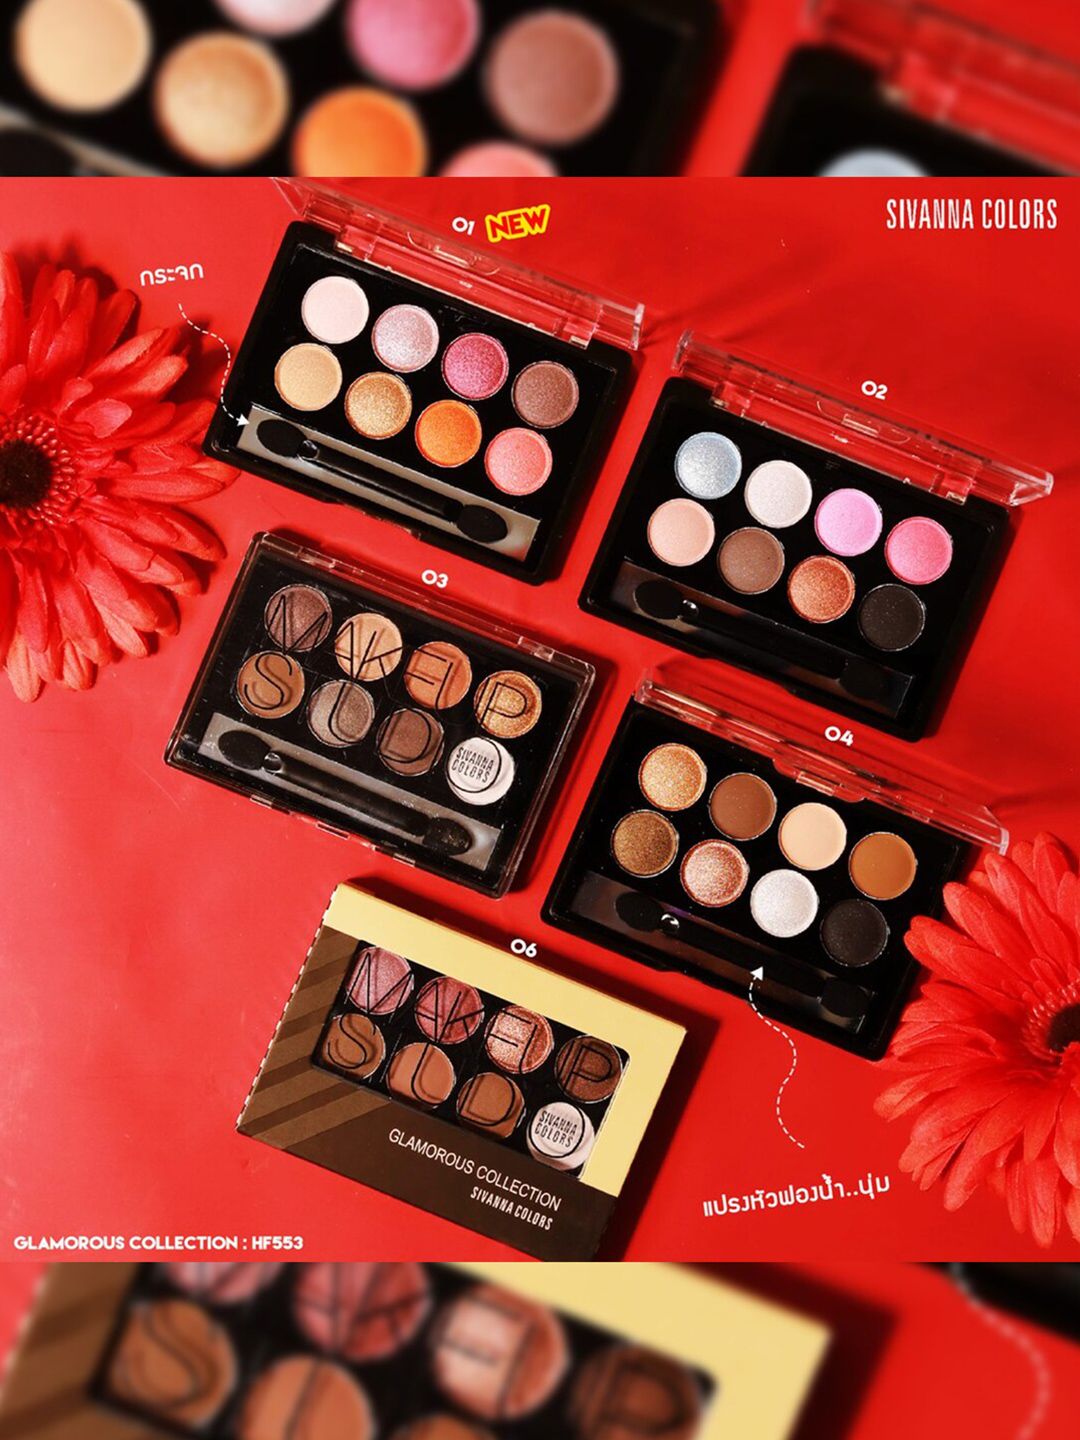 Sivanna Colors Make-Up Studio Glamorous Collection Eye Shadow Palette - HF553 04 Price in India